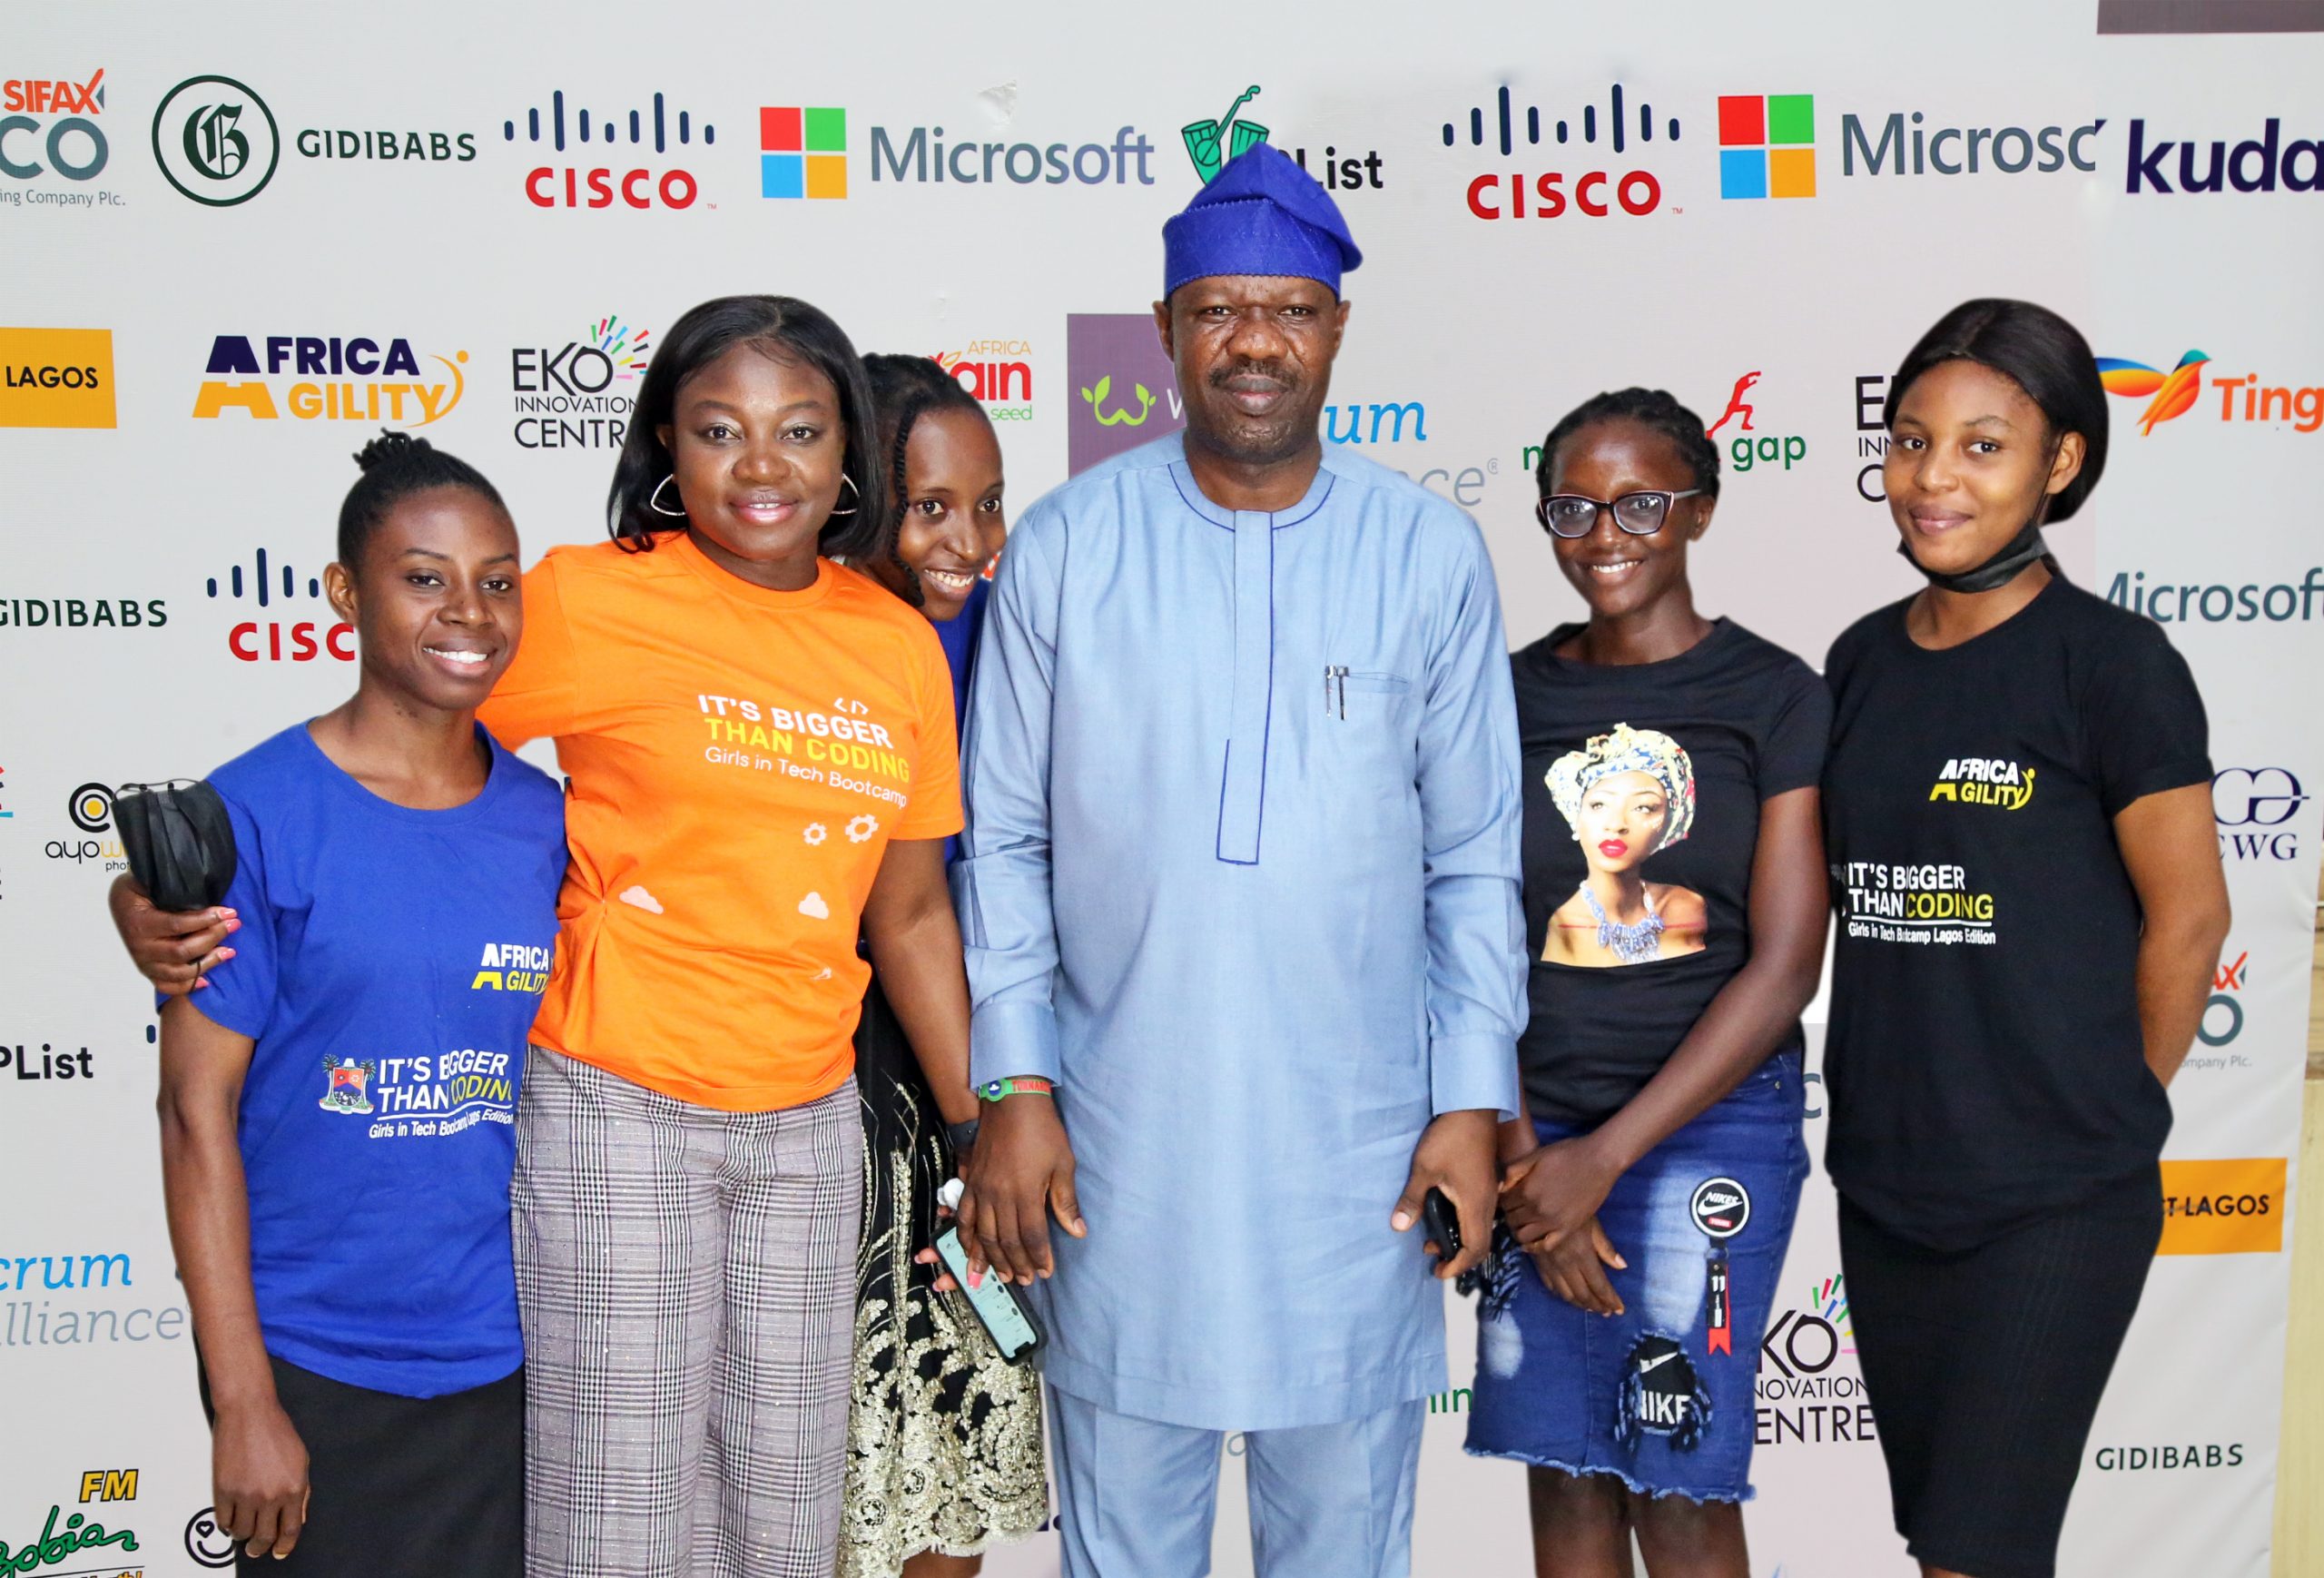 SAHCO Supports Girls, Women Education On Technology